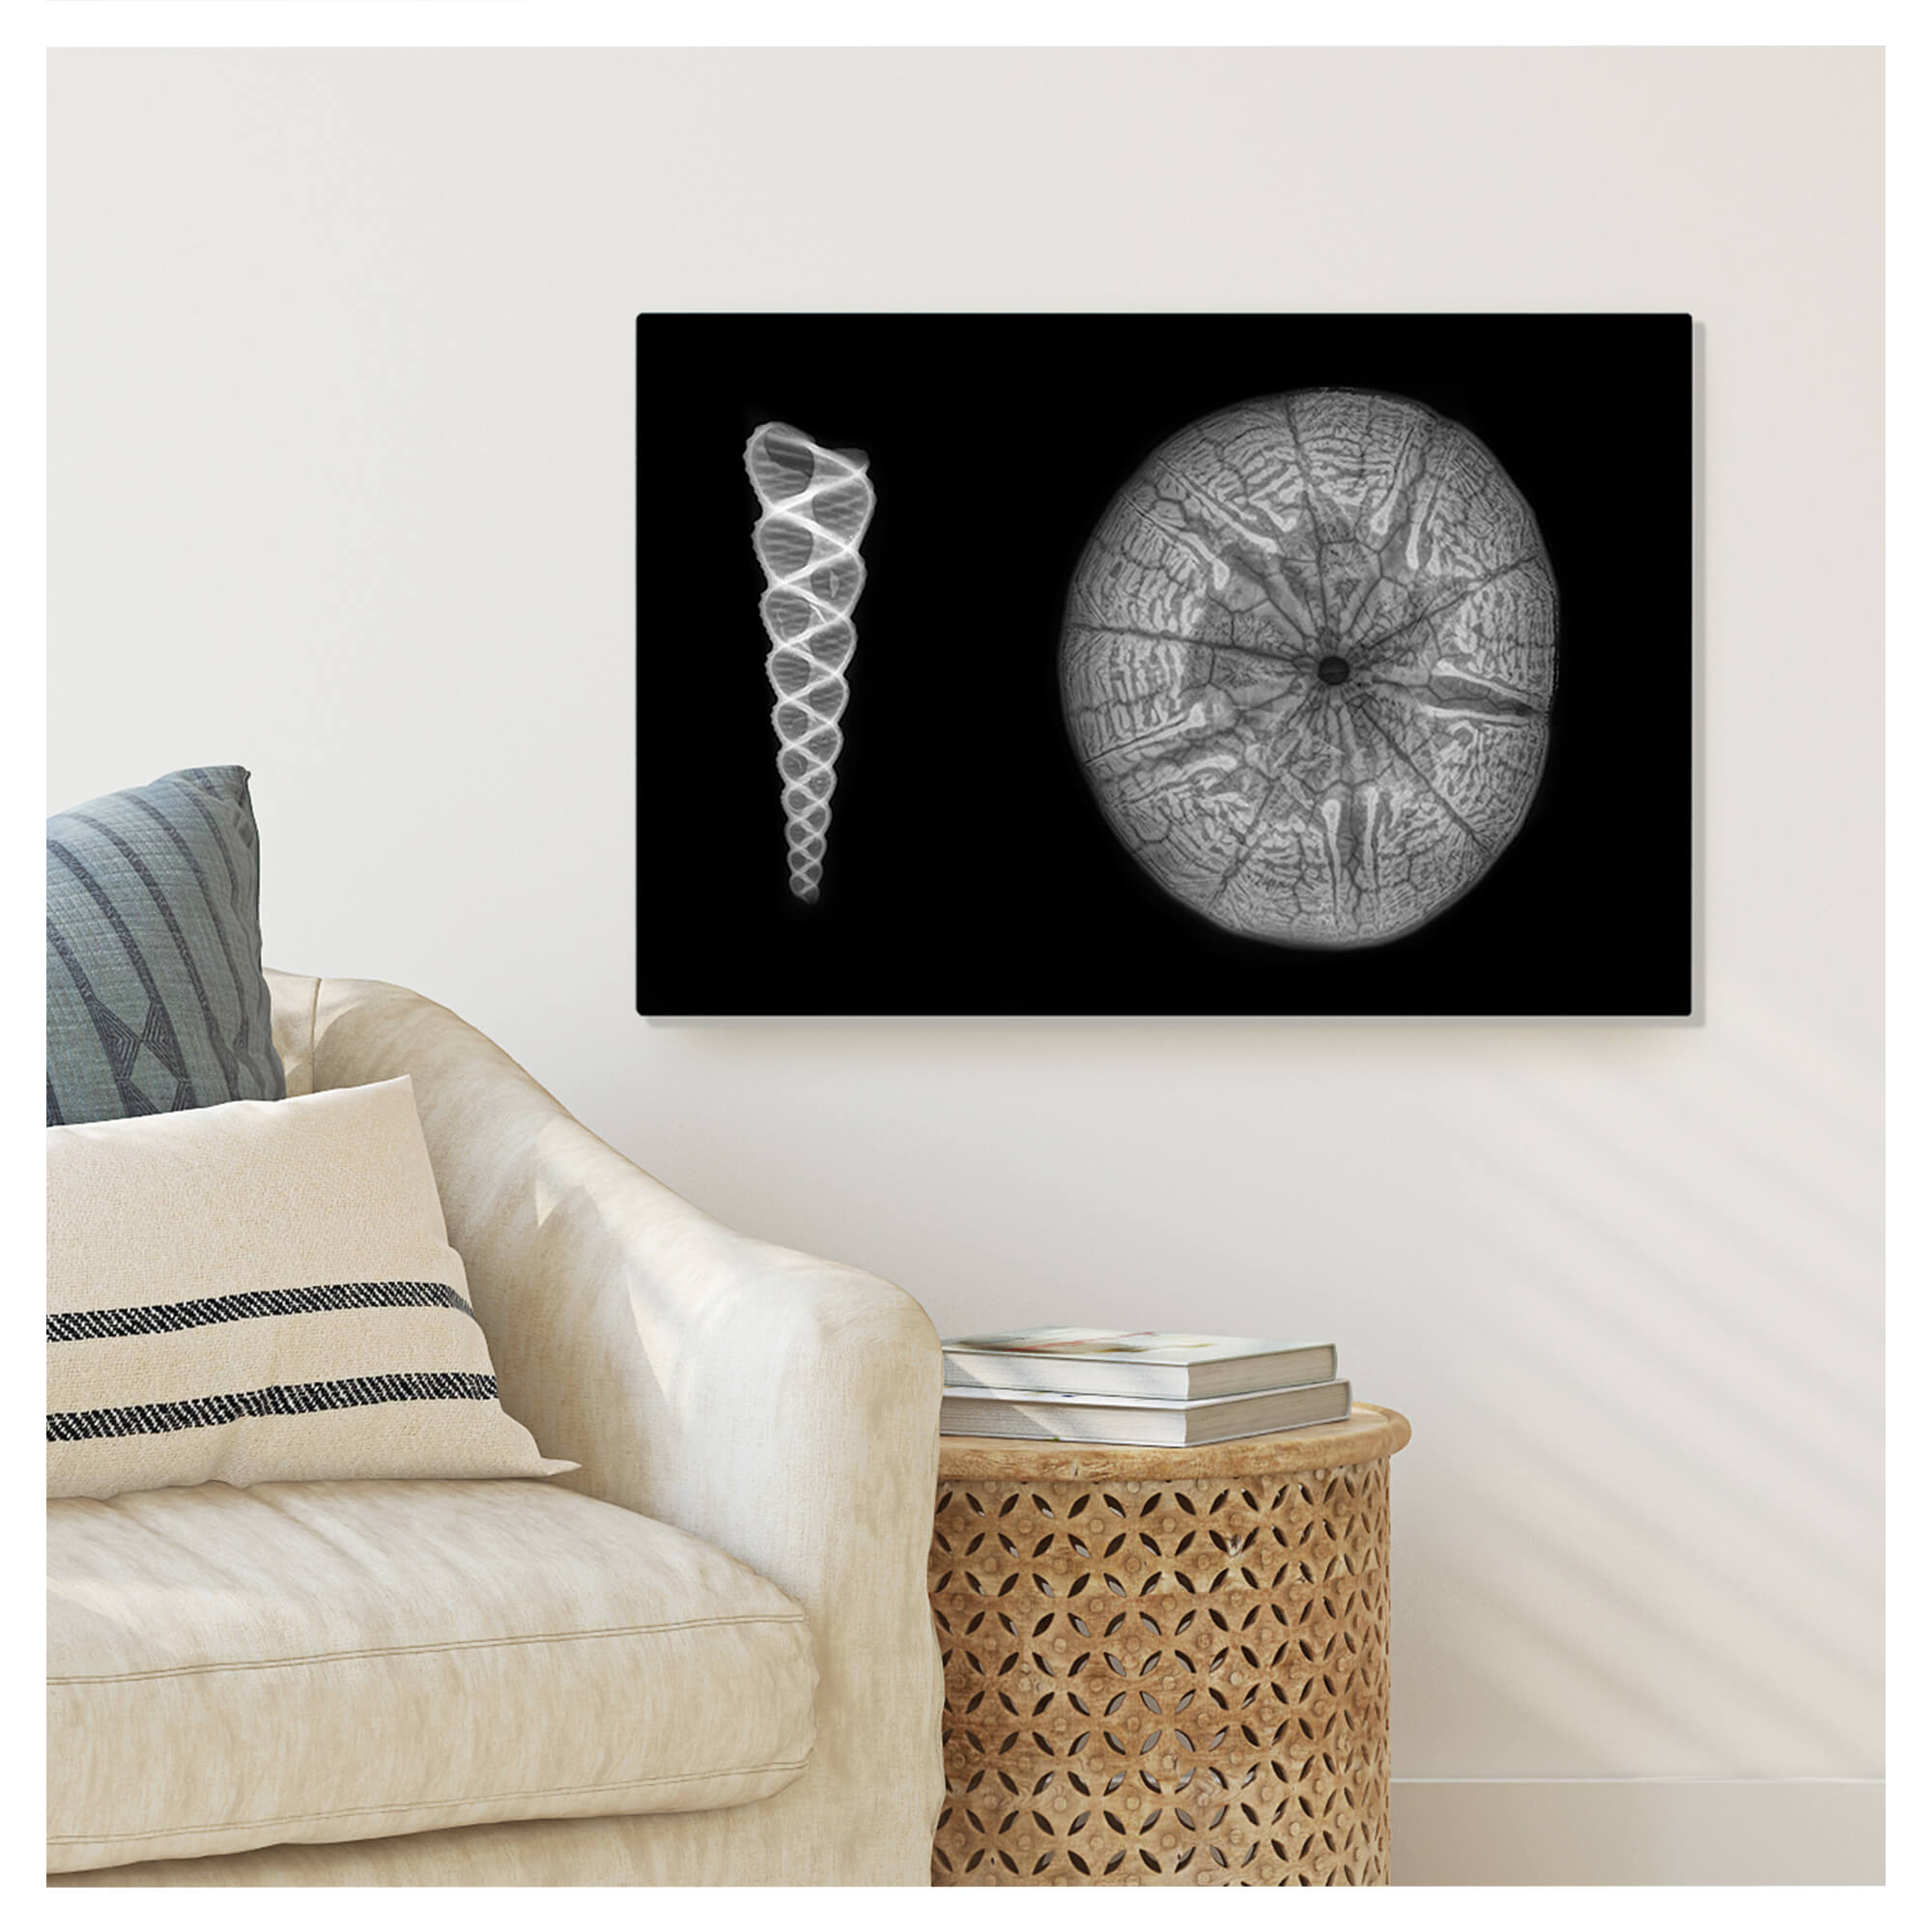 Metal art print wall mockup featuring a grayscale art print of a spiral shell and a sea urchin by Hawaii artist Michelle Smith